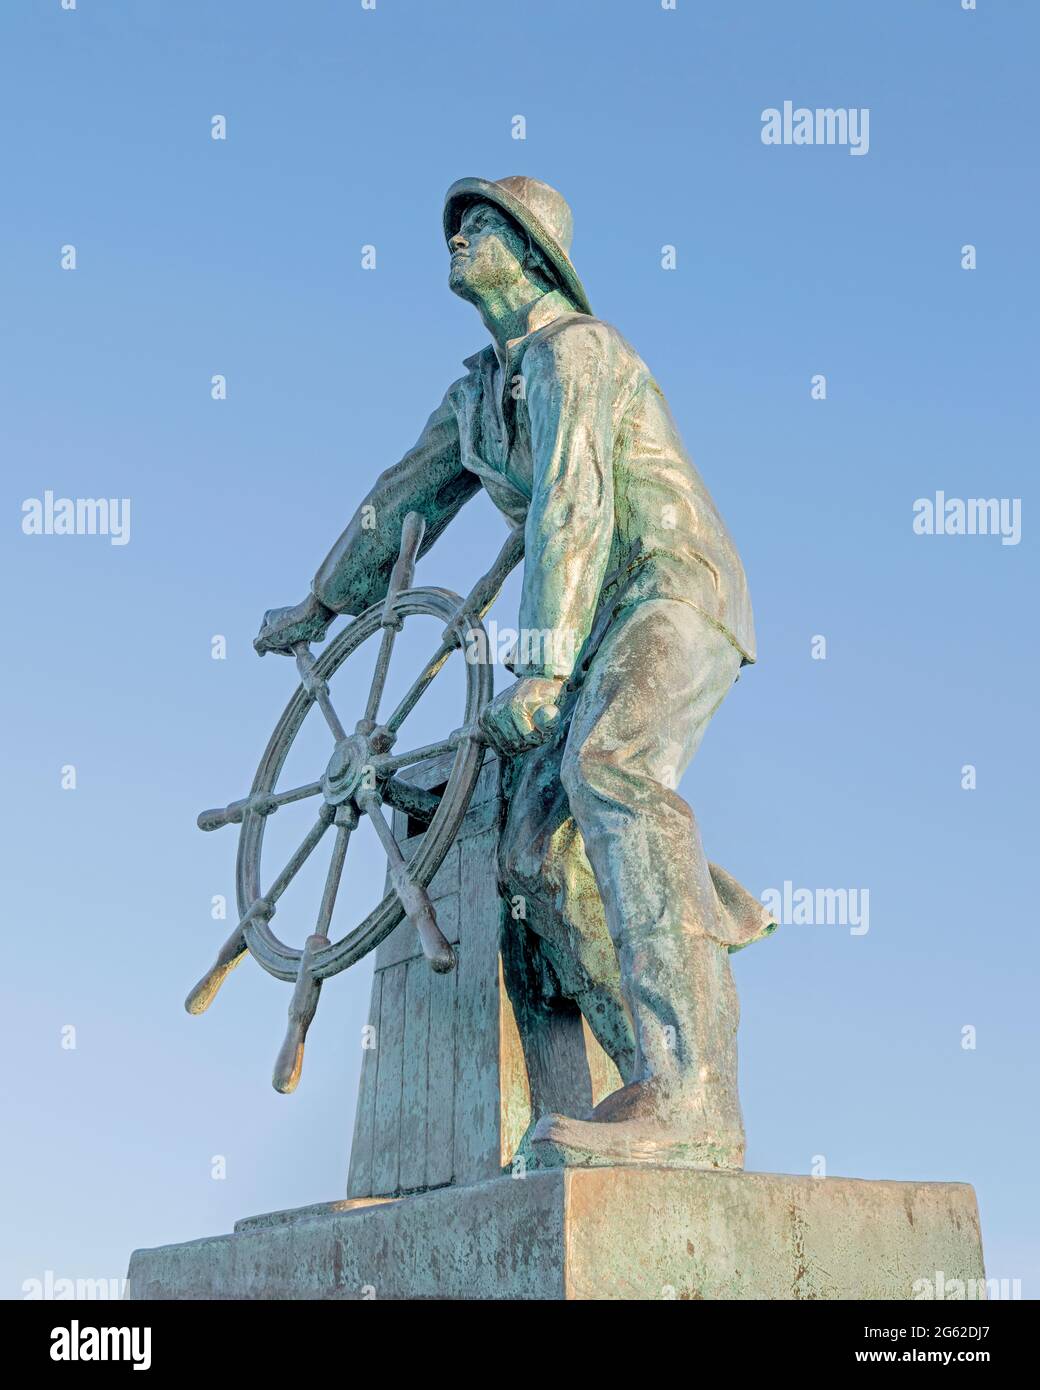 Gloucester, Massachusetts / United States - October 2, 2014: Gloucester Fisherman Memorial, an eight foot bronze staute designed by English sculptor L Stock Photo